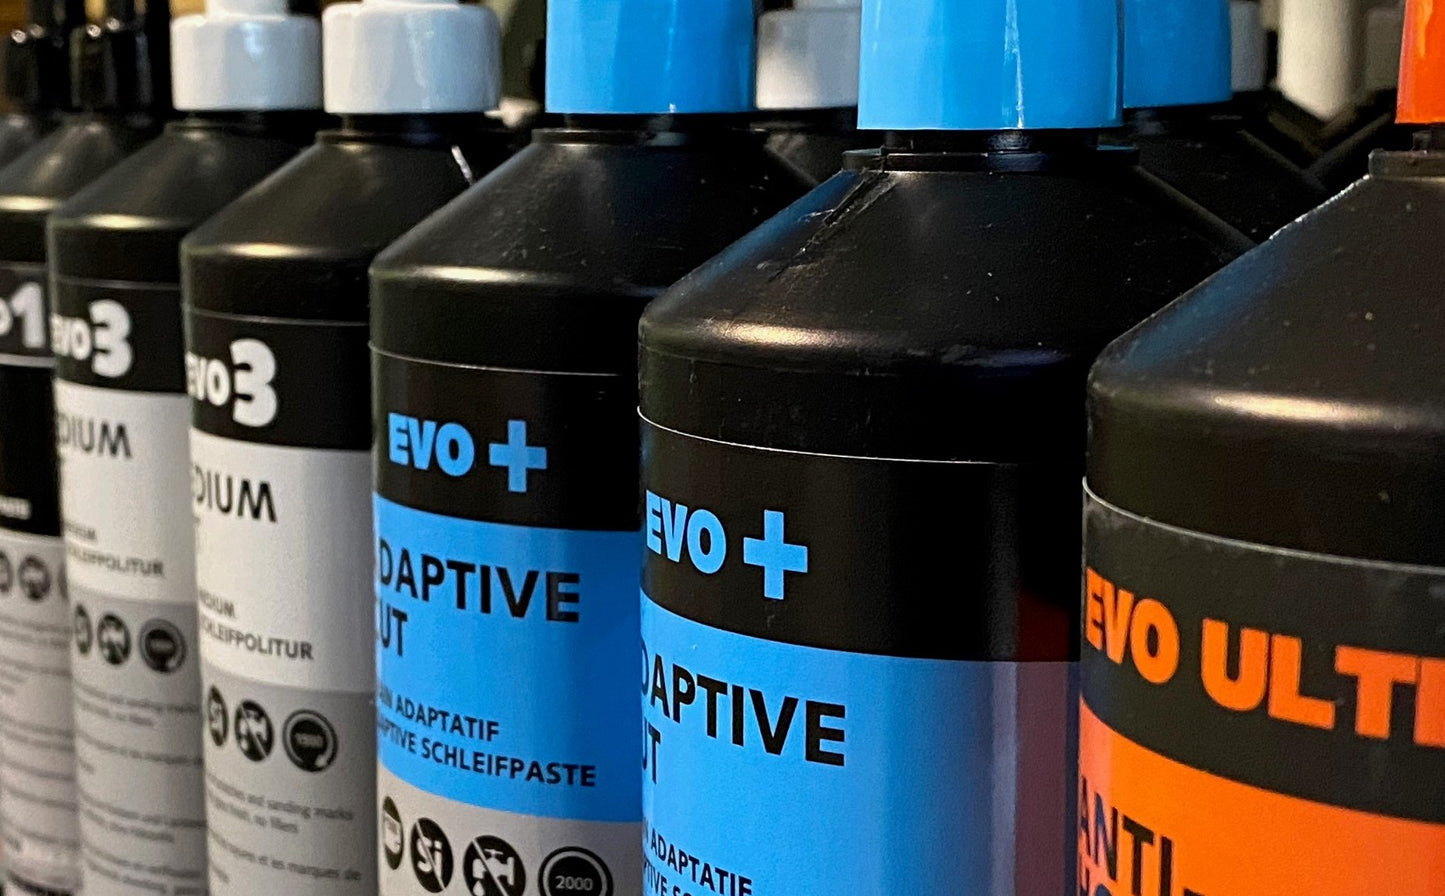 Evo 3 - Renovation Compound 1ltrRenovation Compound Fast cutting compound designed for the rapid removal of scratches, sanding marks, oxidation and paint defects. Diminishing abrasive for fast cutting action and a high gloss finish Low dust Free from sili